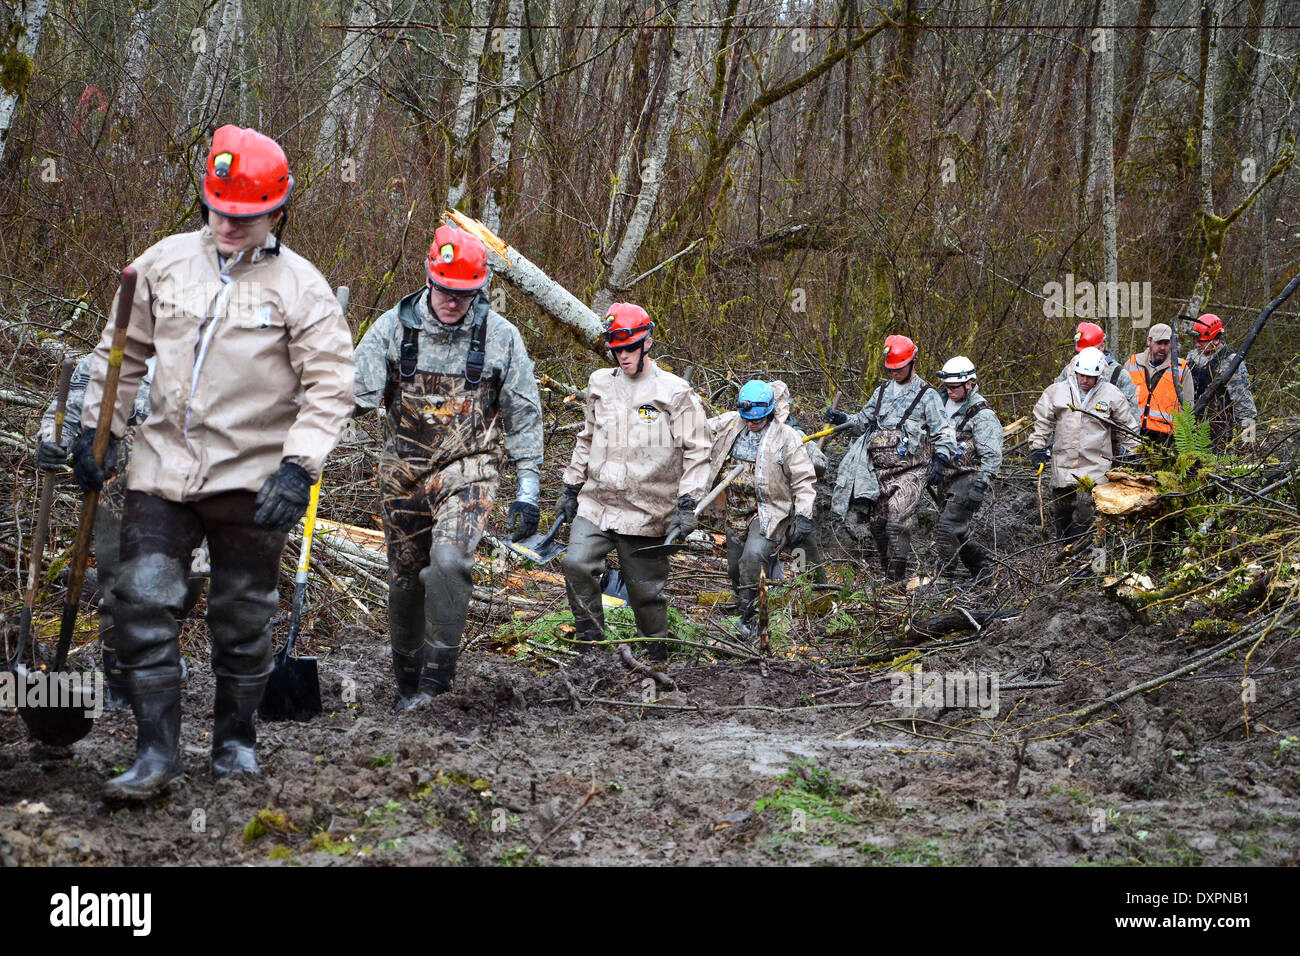 Oso, Washington, USA . 28th Mar, 2014. Rescue workers continue efforts to locate victims of a massive landslide that killed at least 28 people and destroyed a small riverside village in northwestern Washington state March 28, 2014 in Oso, Washington. Credit:  Planetpix/Alamy Live News Stock Photo